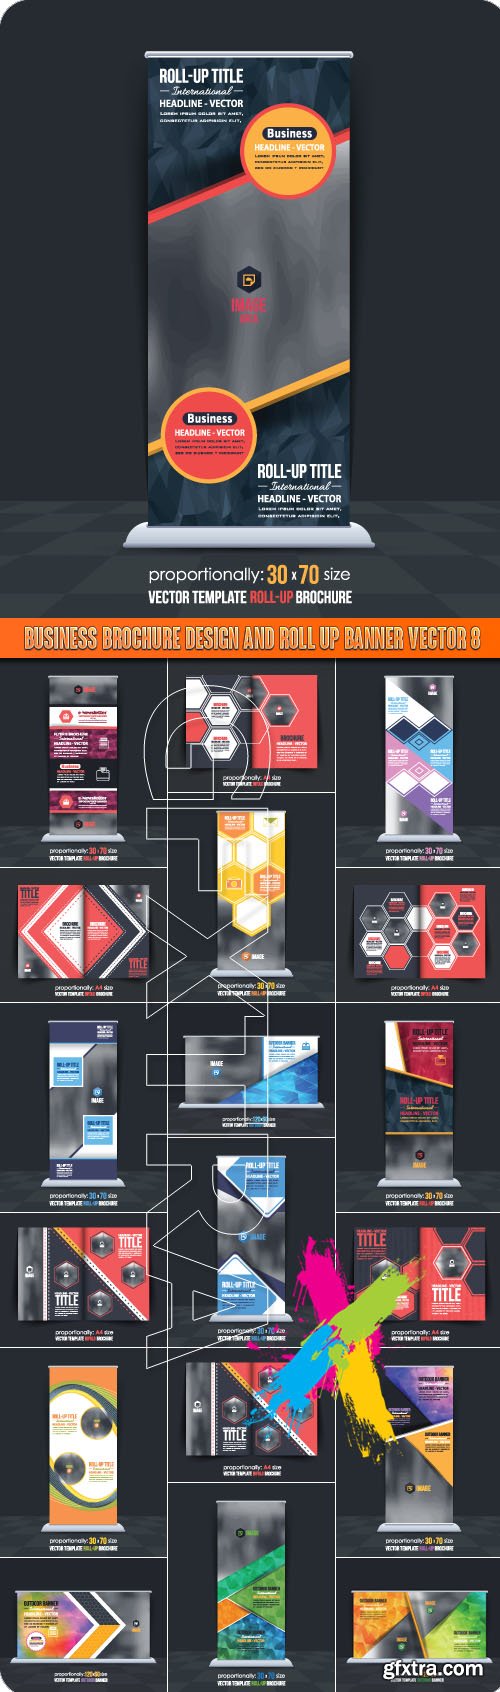 Business Brochure Design and Roll up banner vector 8